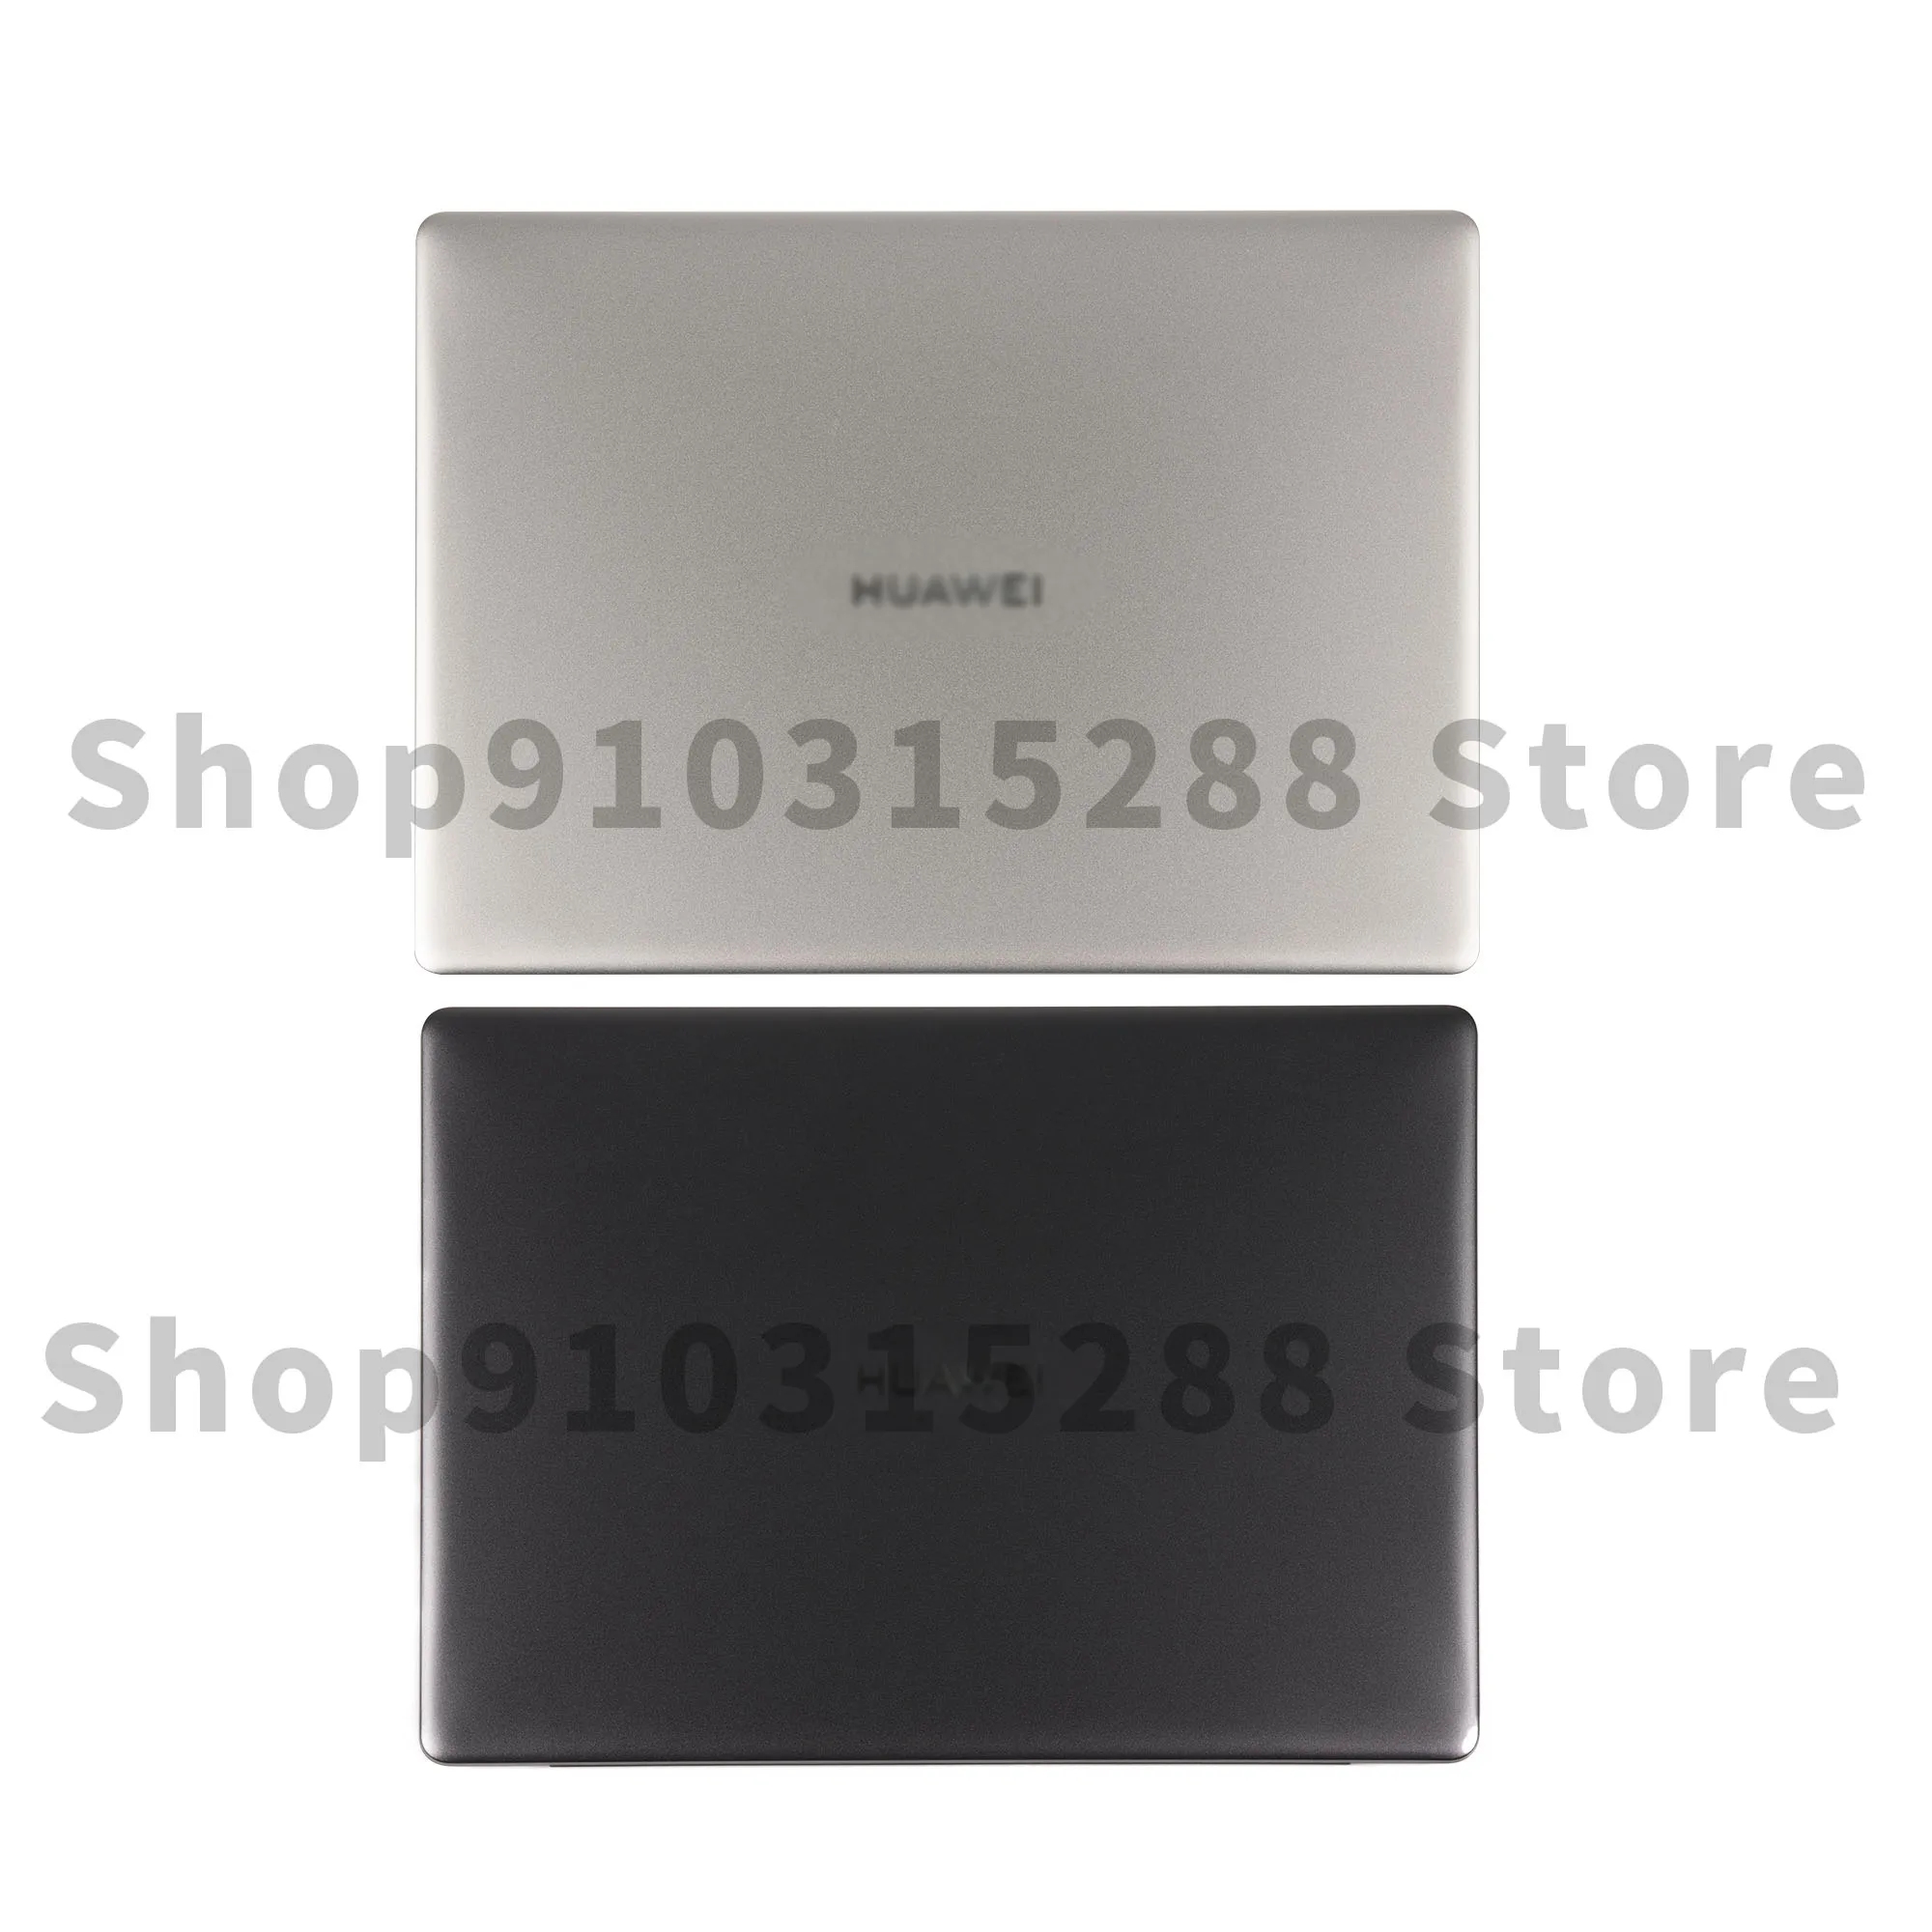 

New Original LCD Back Cover For Huawei MateBook 13 WRT-W19 WRT-W19L WRT-W29 WRT-W29L HN-W19L WRT-W09 WRT-W09L WRTB-WFE9L